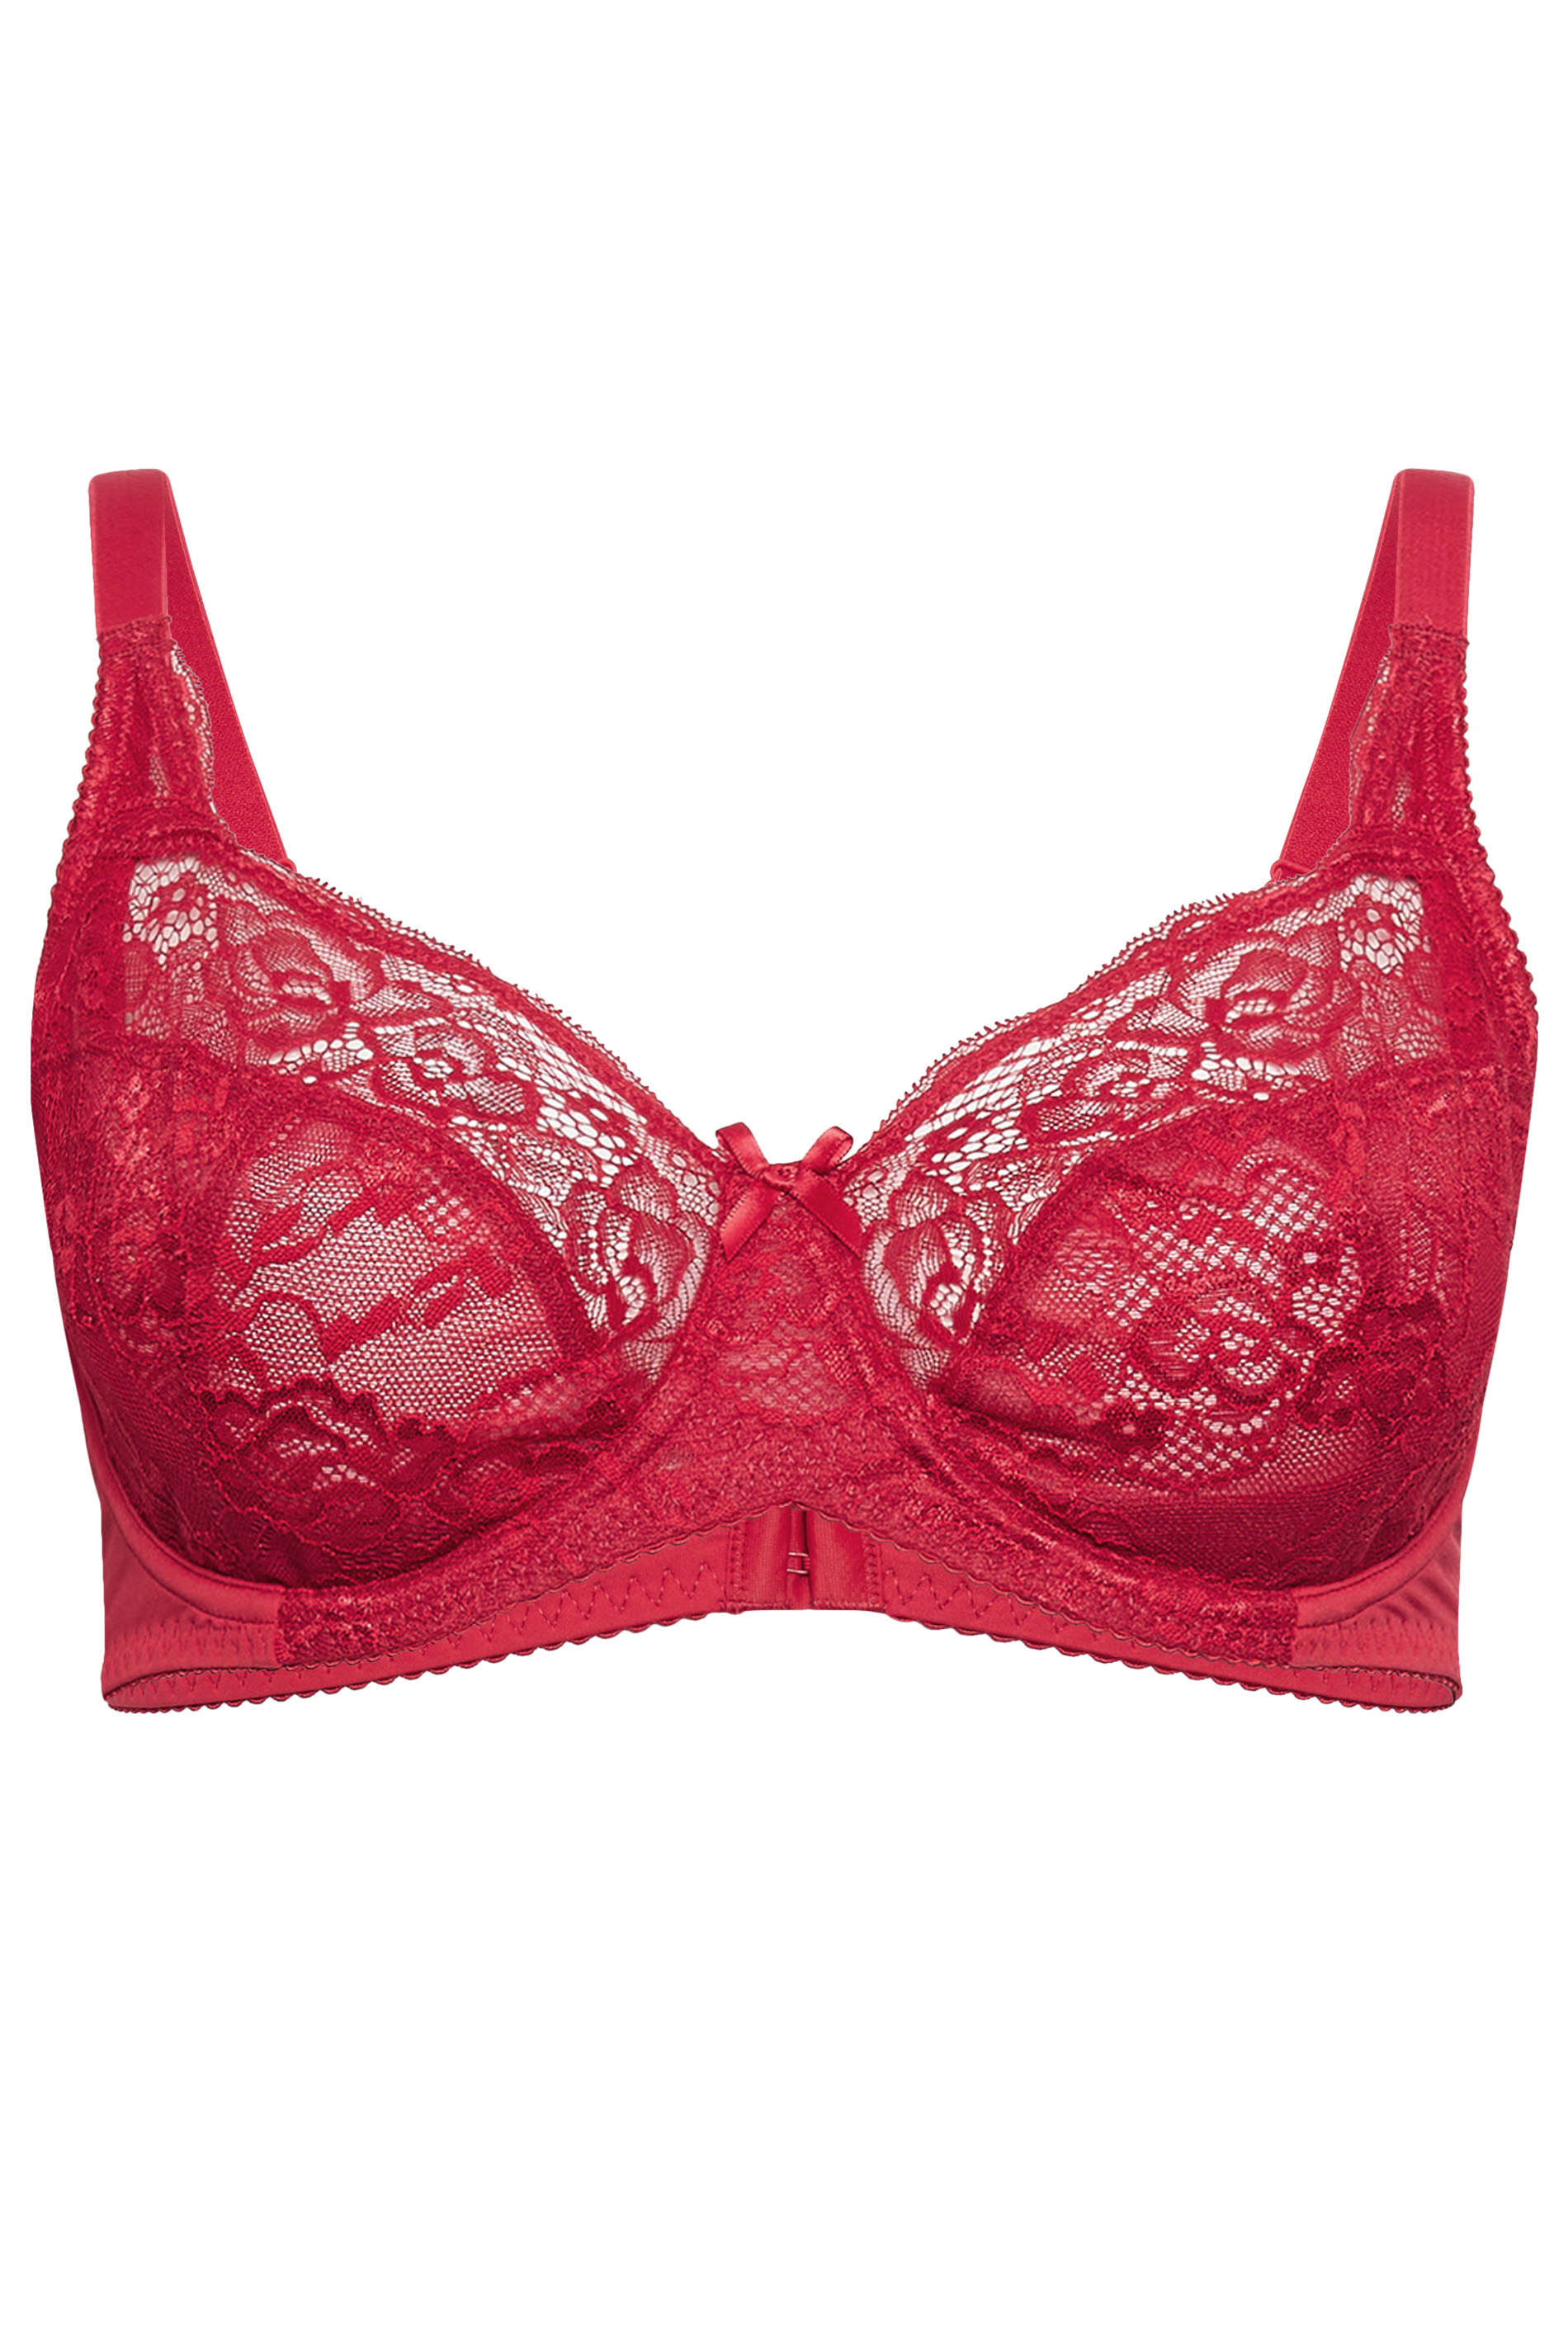 YOURS Plus Size Red Stretch Lace Non-Padded Underwired Balcony Bra